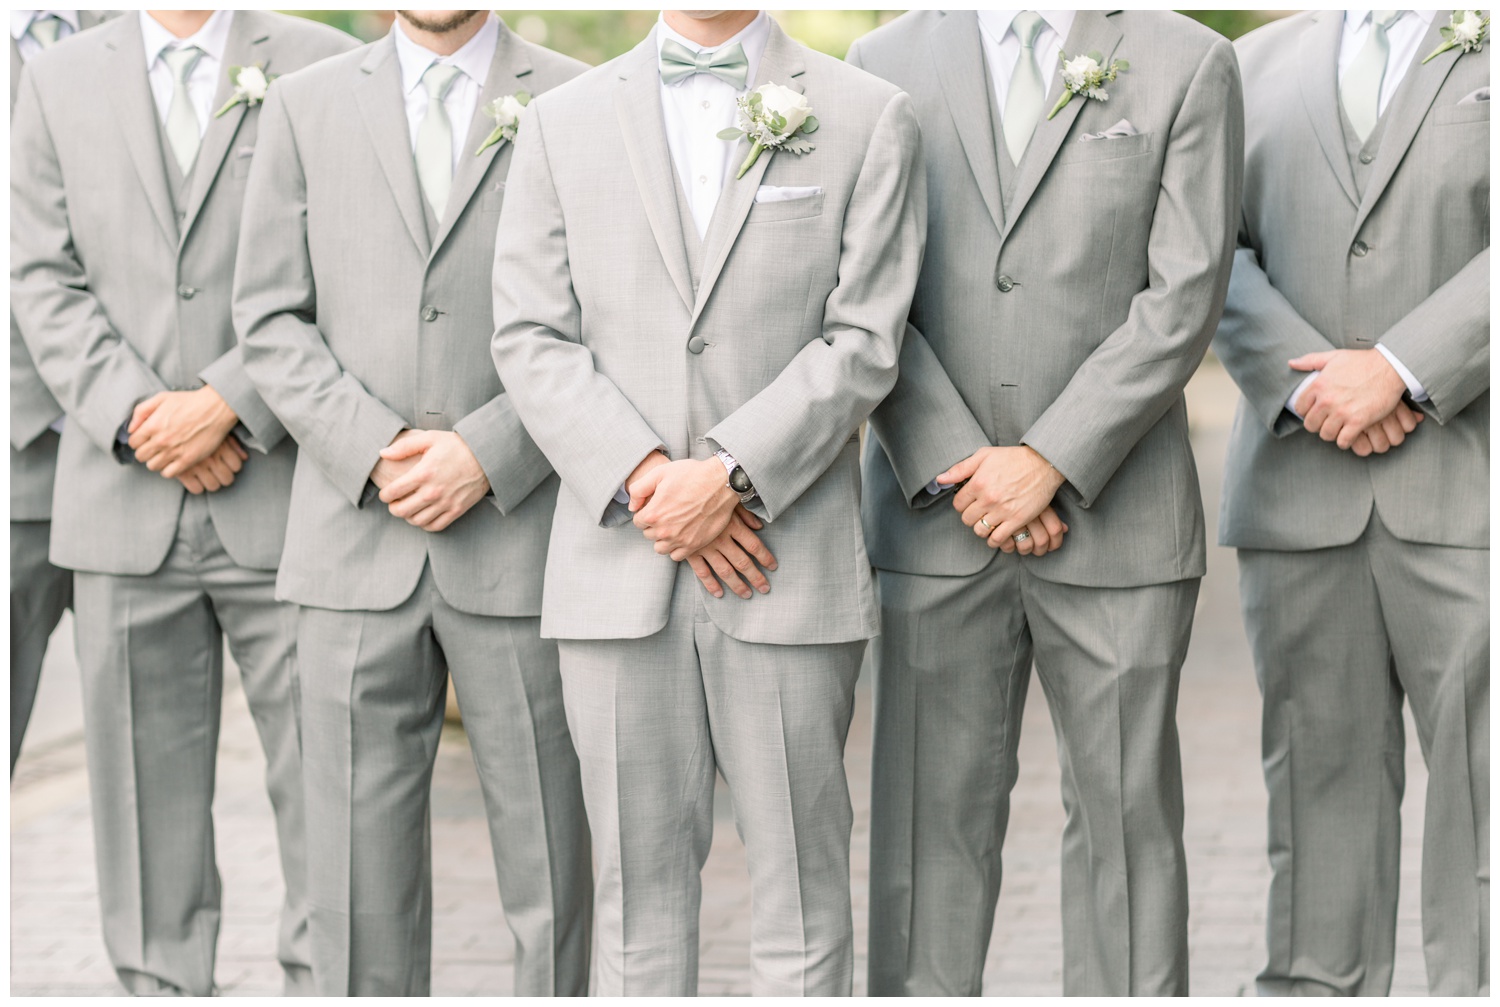 Groomsmen Boutonnieres and Suits